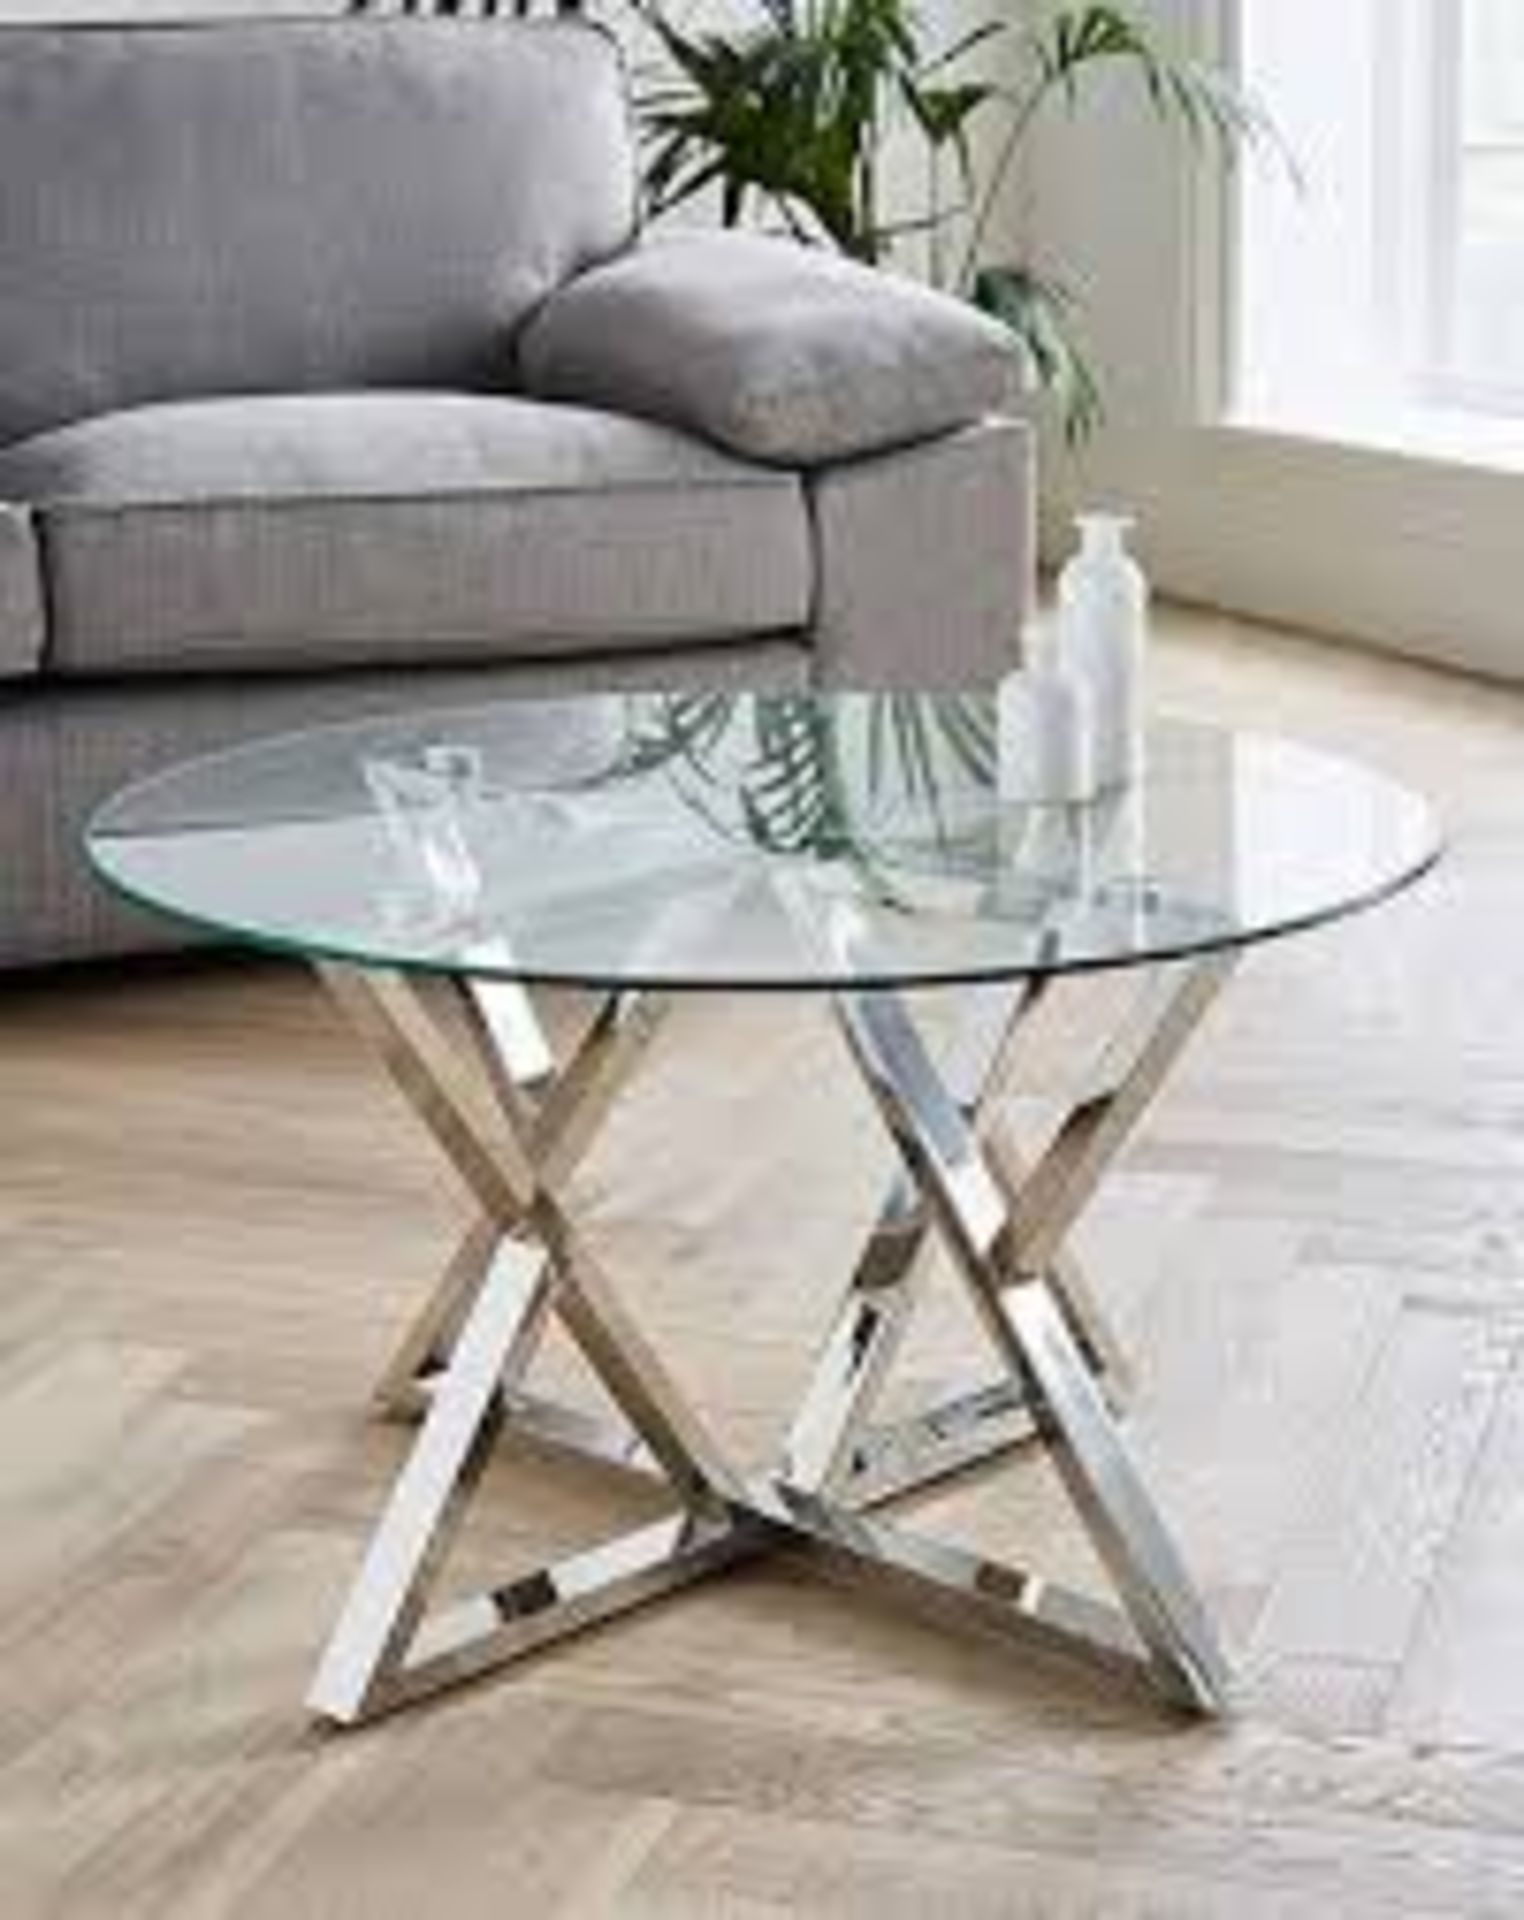 Brand New Estelle Coffee Table Chrome/Glass, Luxury Modern Look Coffee Table for that Centre piece